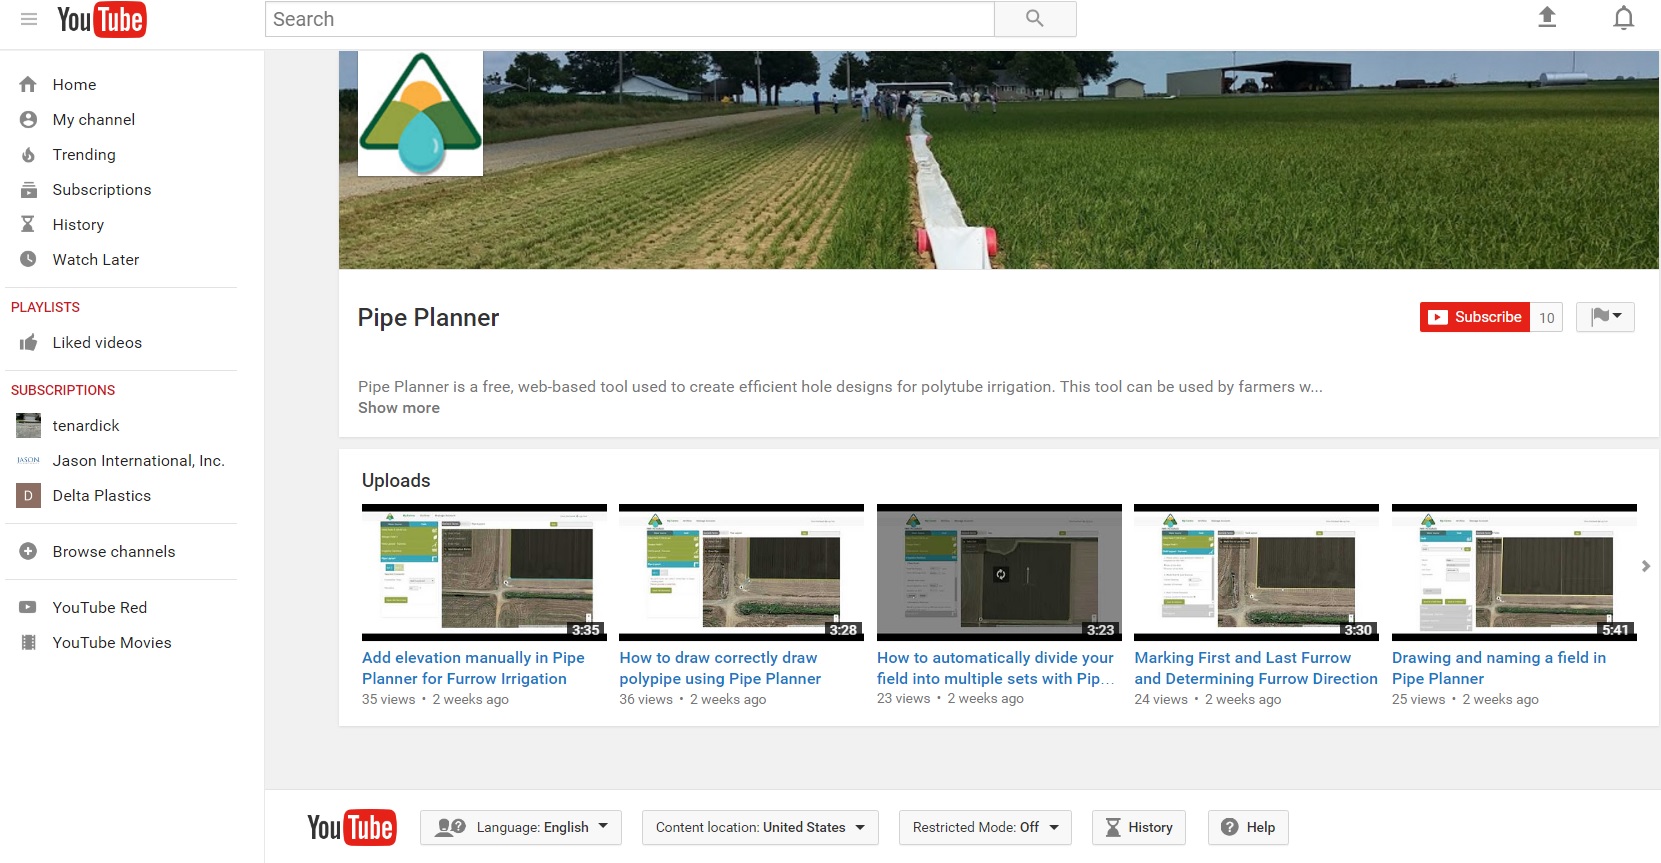 Learn More About Pipe Planner